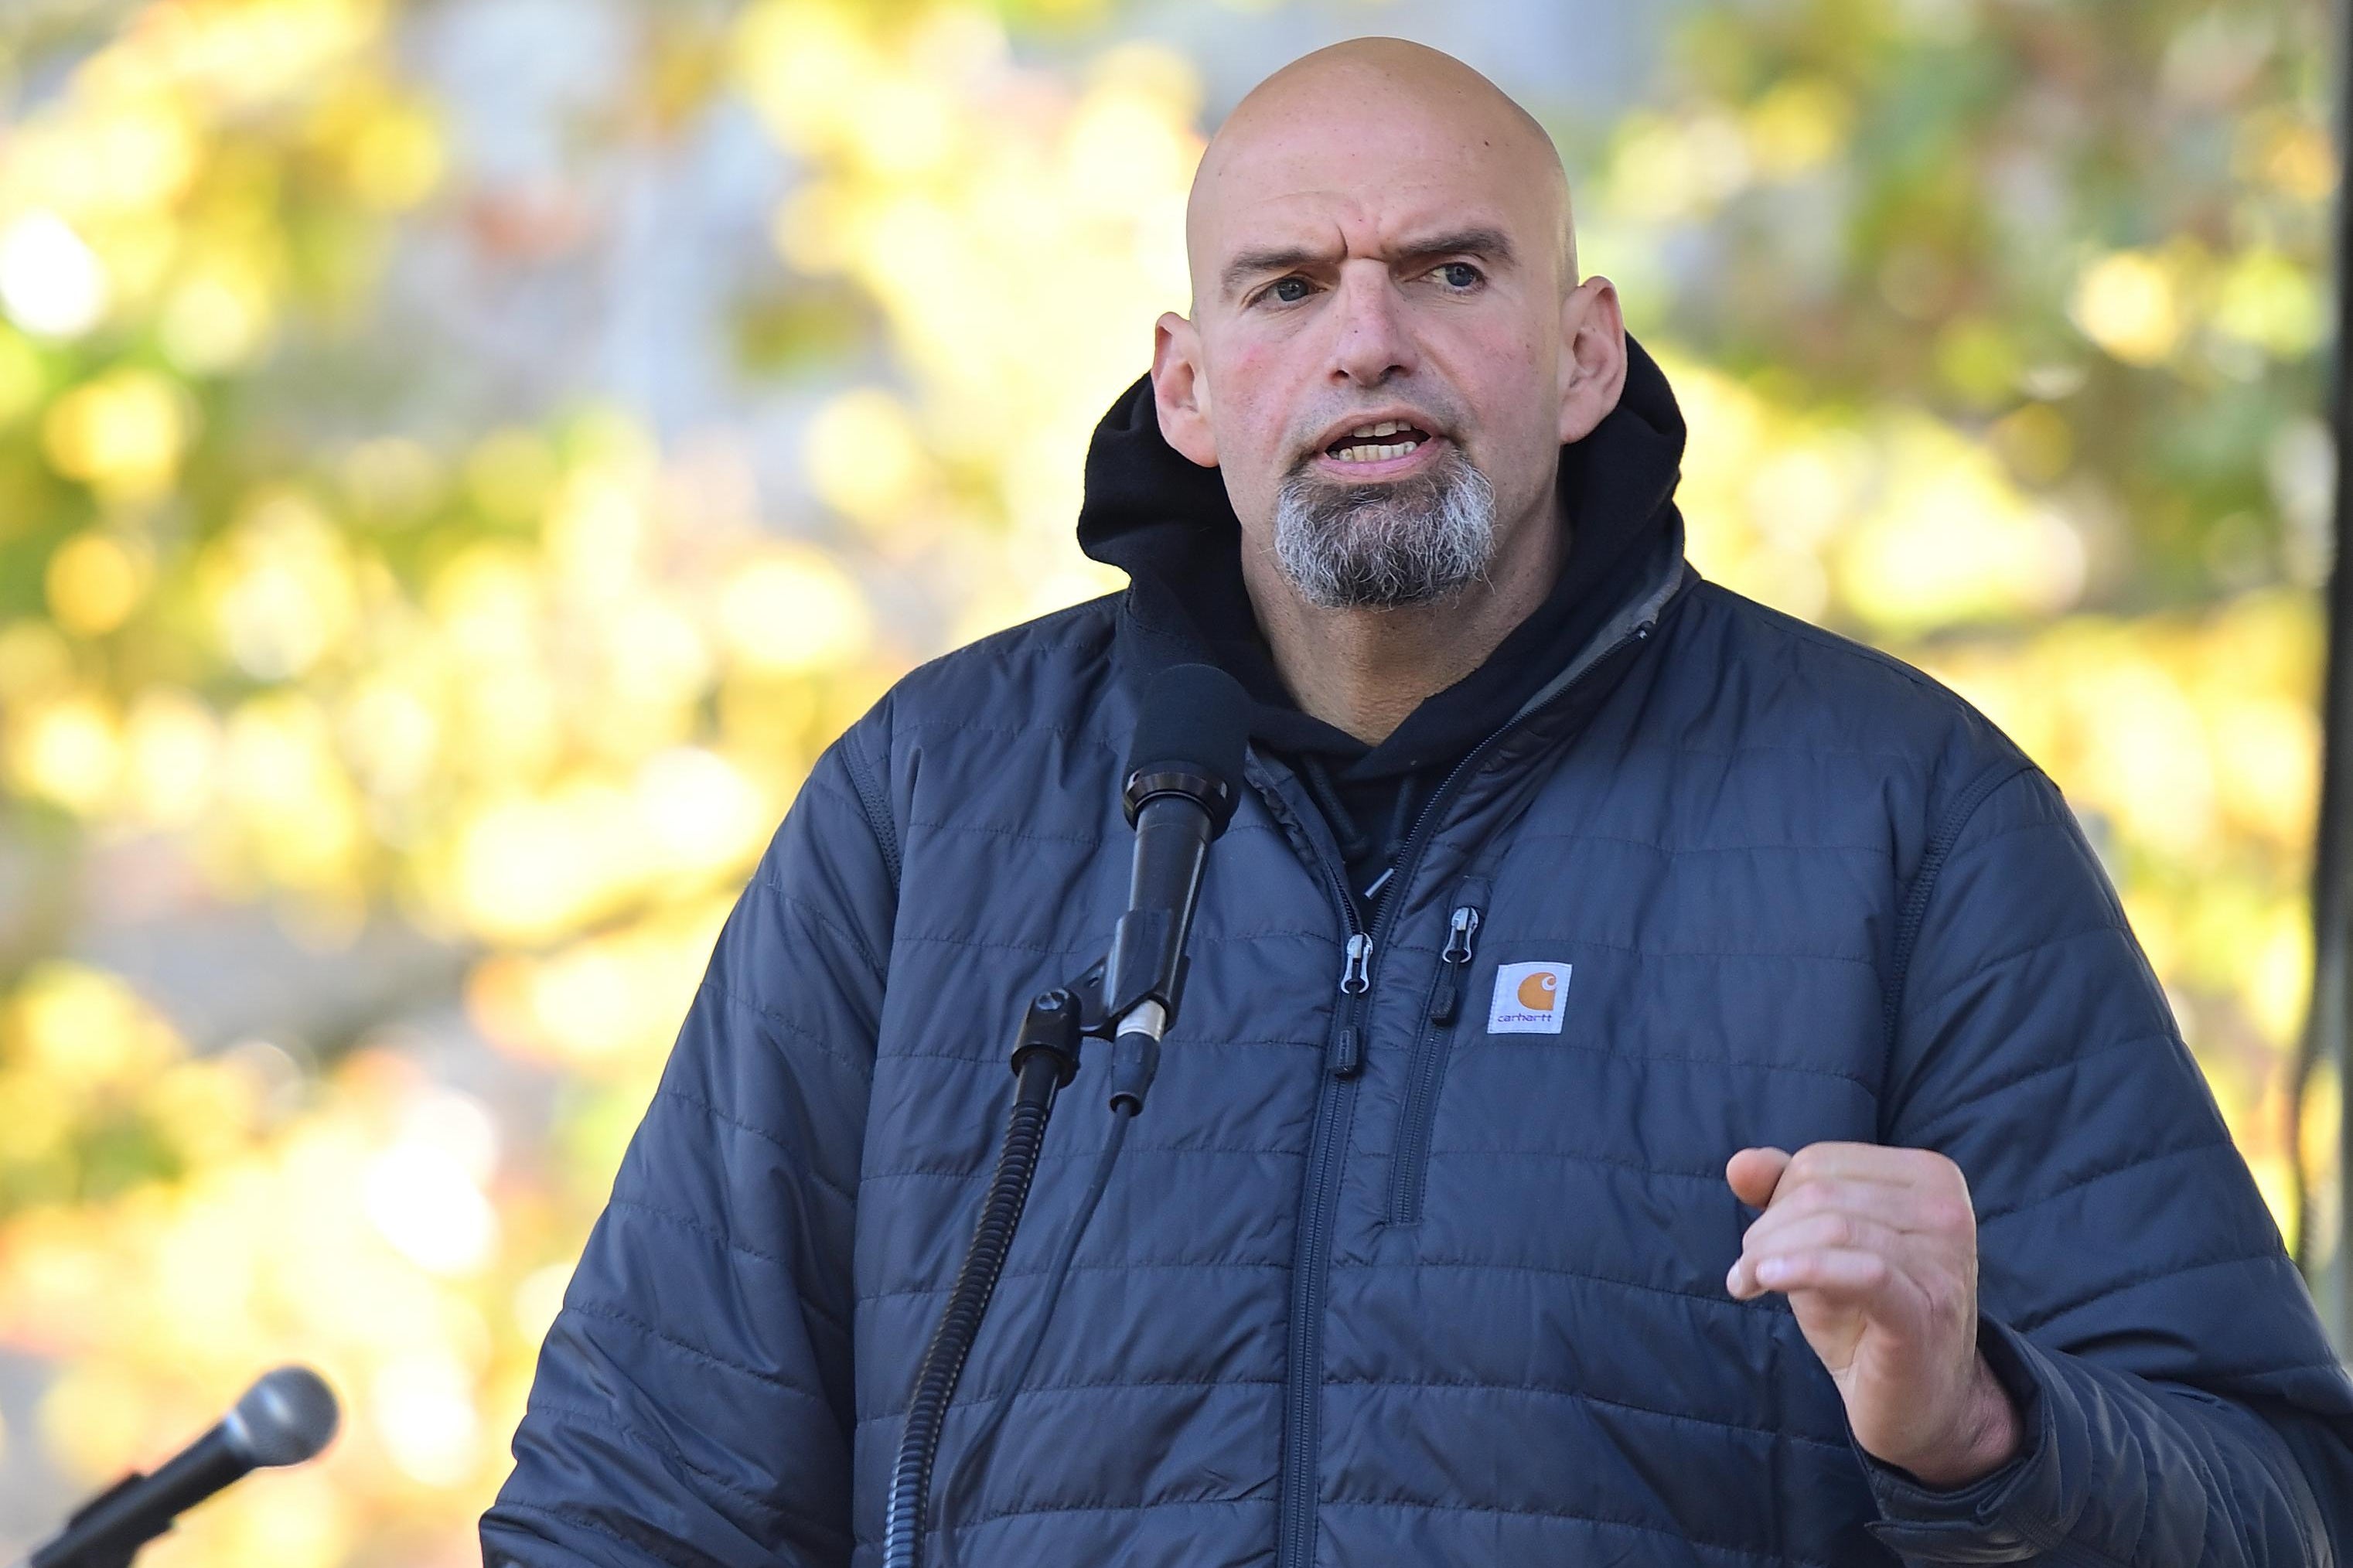 PHILADELPHIA, PA - OCTOBER 15:  Democratic candidate for U.S. Senate John Fetterman addresses supporters during a joint rally with Democratic candidate for Governor Pennsylvania Attorney General Josh Shapiro at Norris Park on October 15, 2022 in Philadelphia, Pennsylvania.  Election Day will be held nationwide on November 8, 2022. (Photo by Mark Makela/Getty Images)